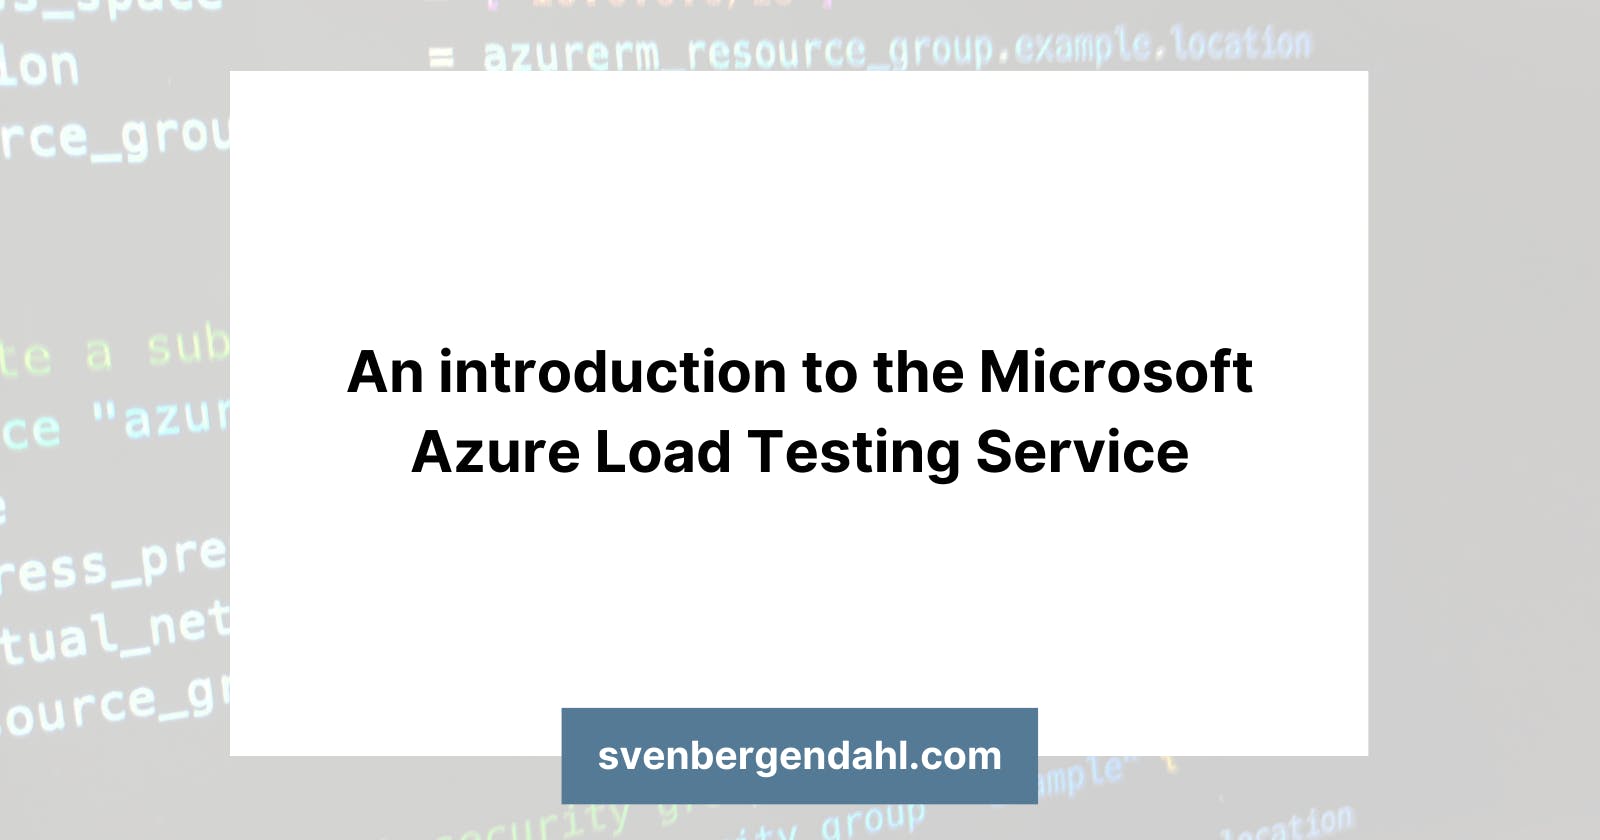 An introduction to the Microsoft Azure Load Testing Service